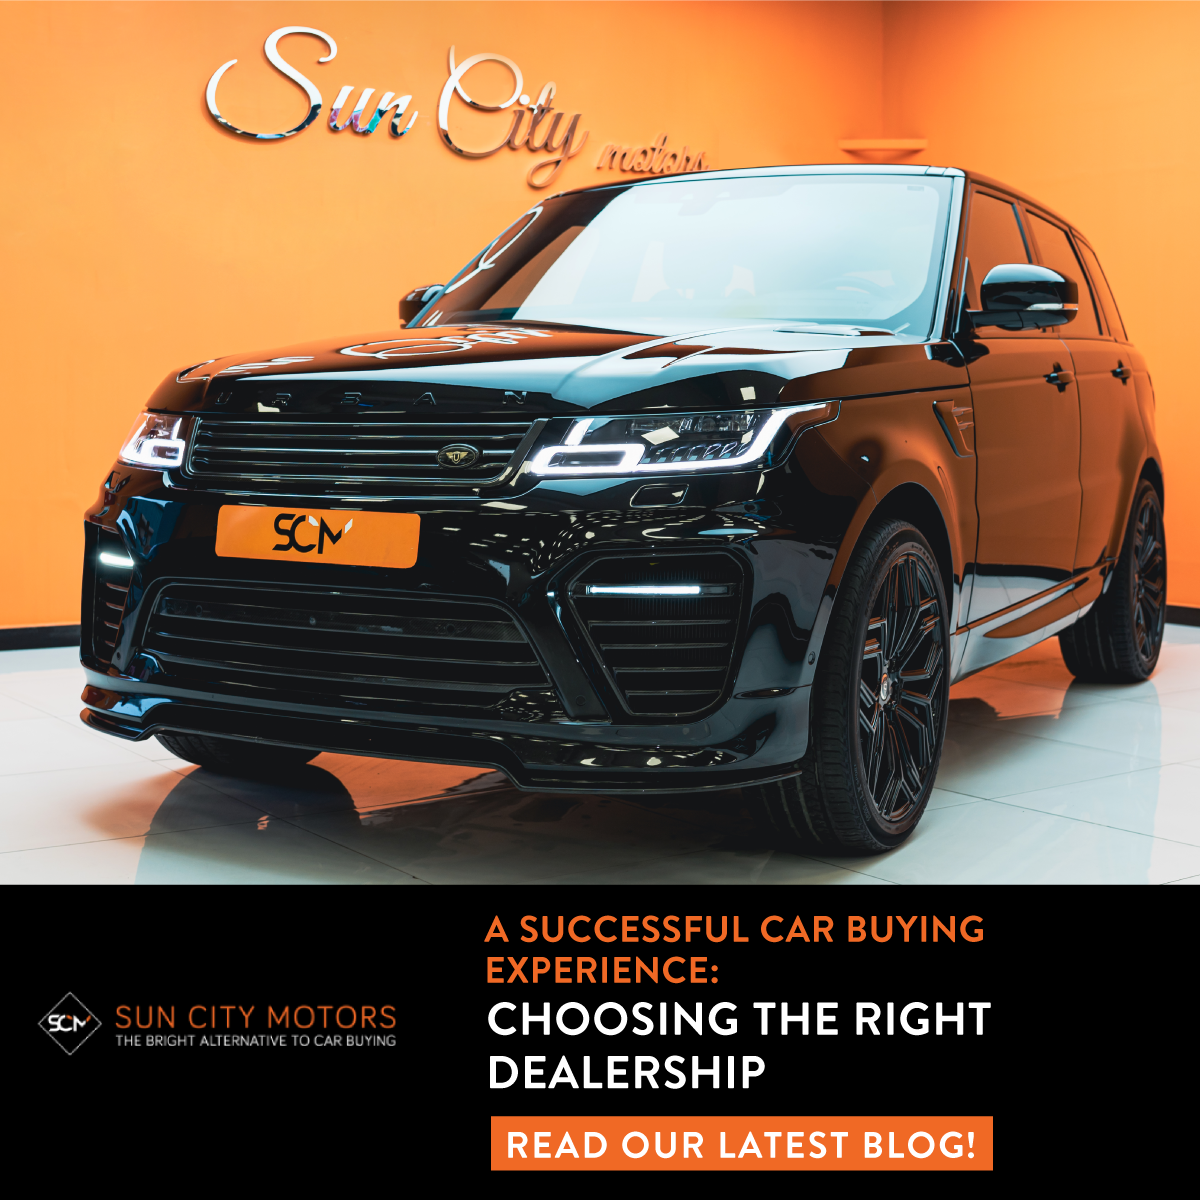 A Successful Car Buying Experience: Choosing the Right Dealership